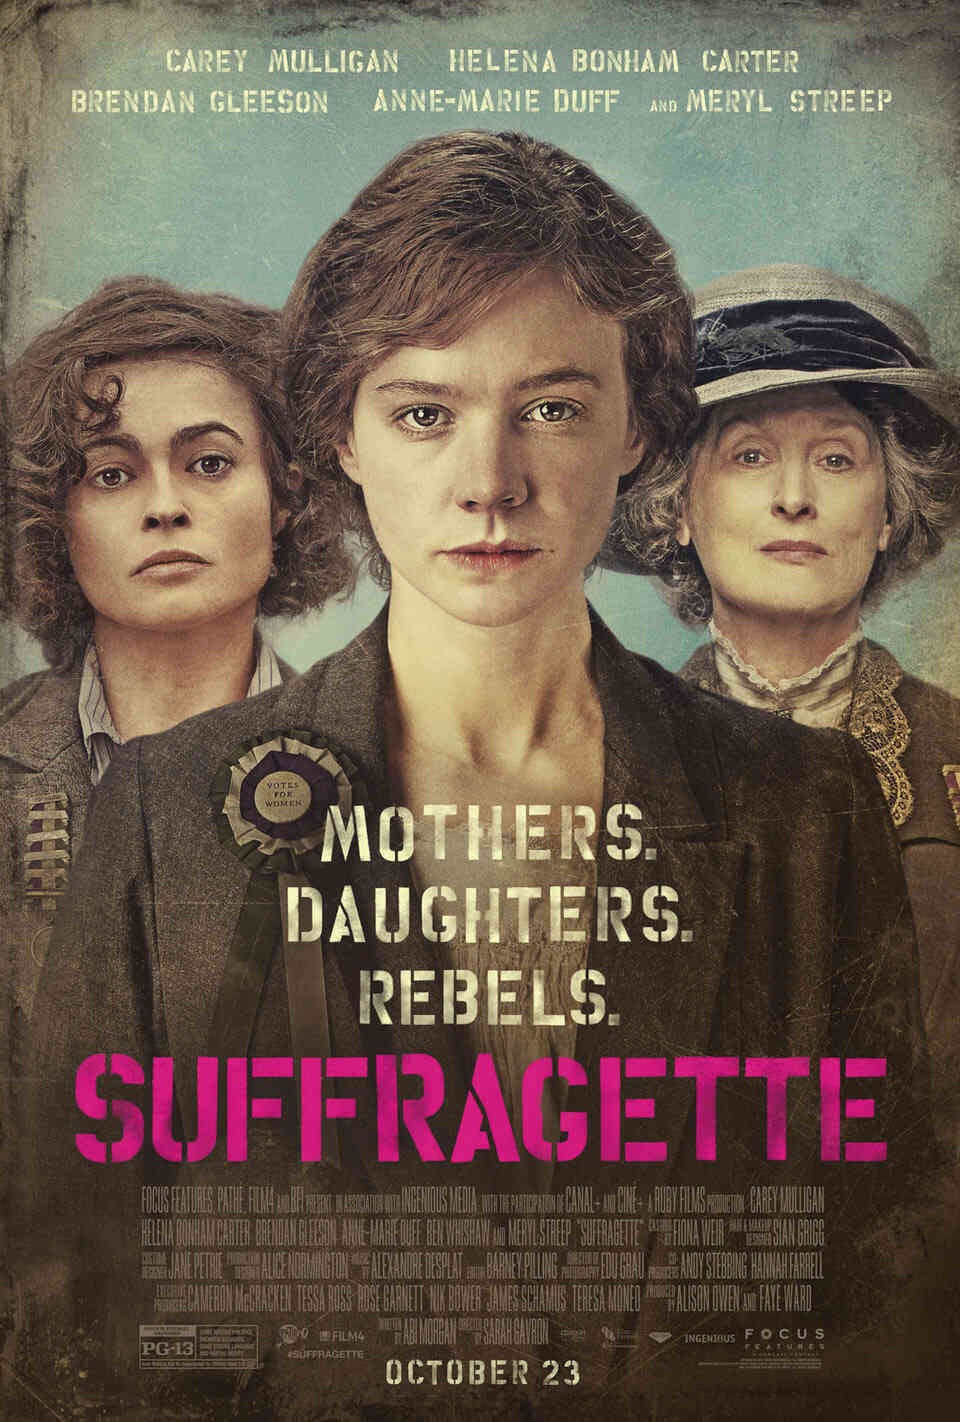 Read Suffragette screenplay (poster)